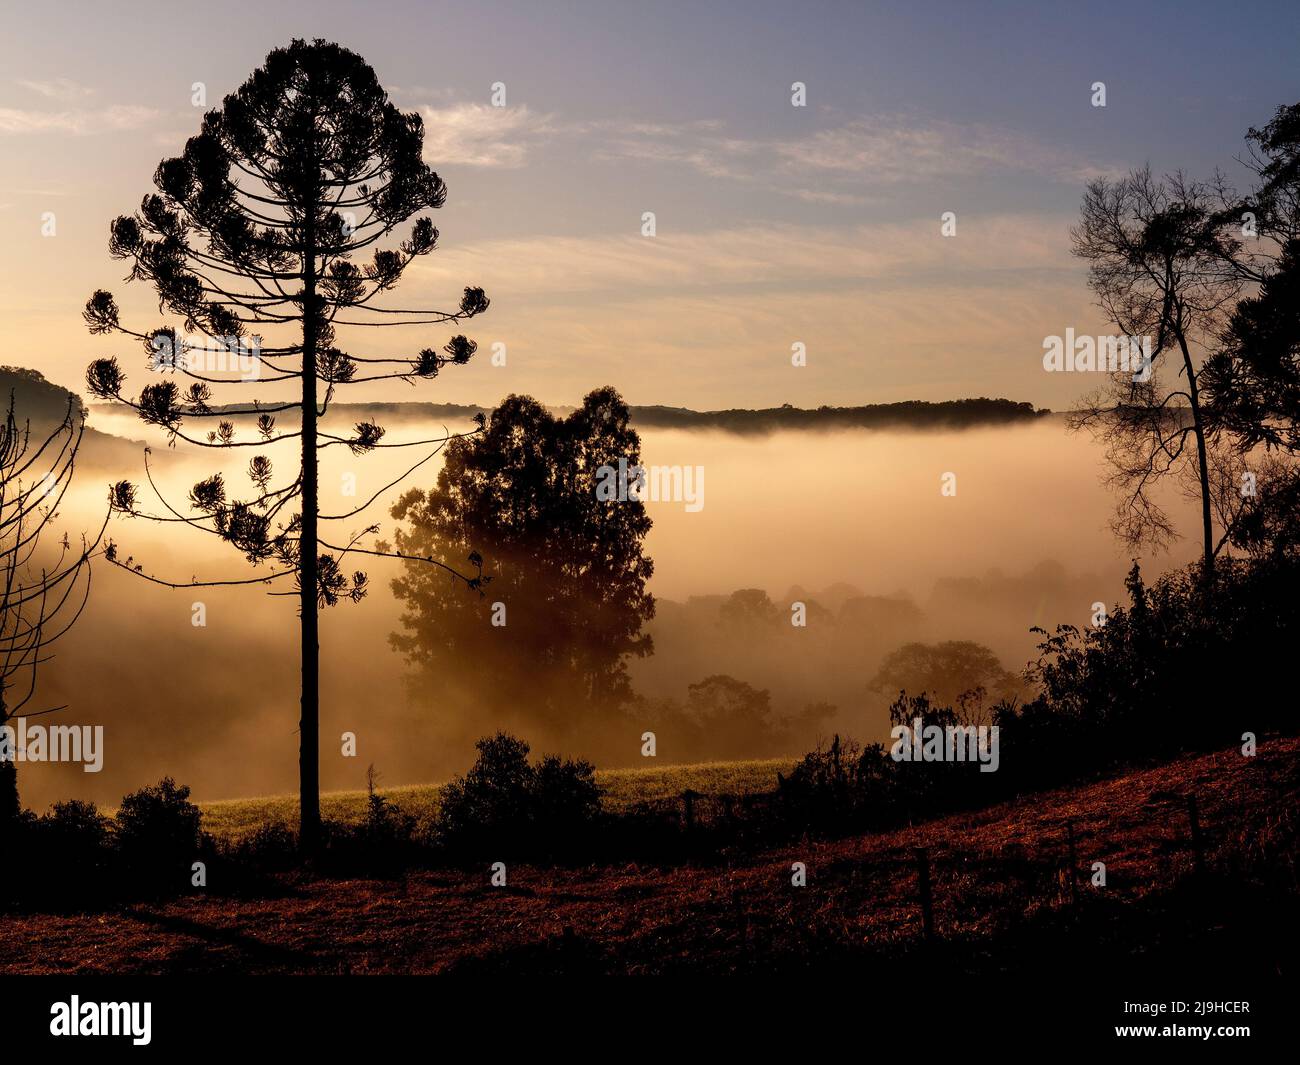 Araucaria tree in the early morning mist, Paraná State, Brazil Stock Photo